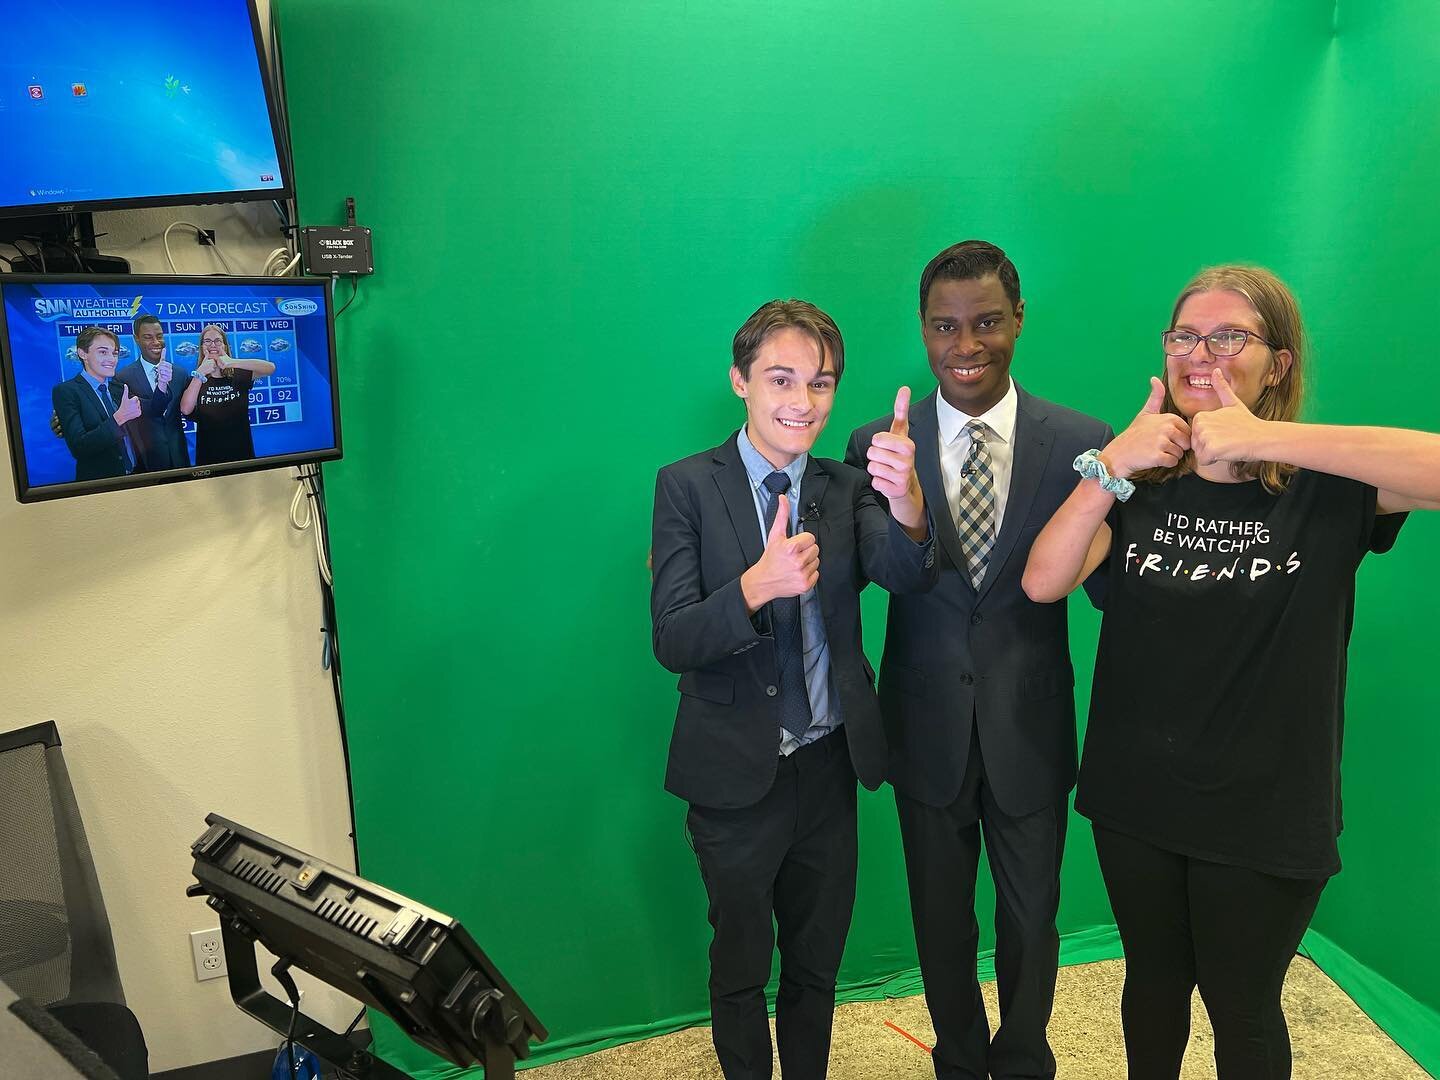 It&rsquo;s the last day of the month which means another edition of Haven Happenings is coming soon to a screen near you!

Huge thanks to SNN, The Suncoast News Network and Chief Meteorologist Justin Mosely for showing us the ropes in a real studio! 